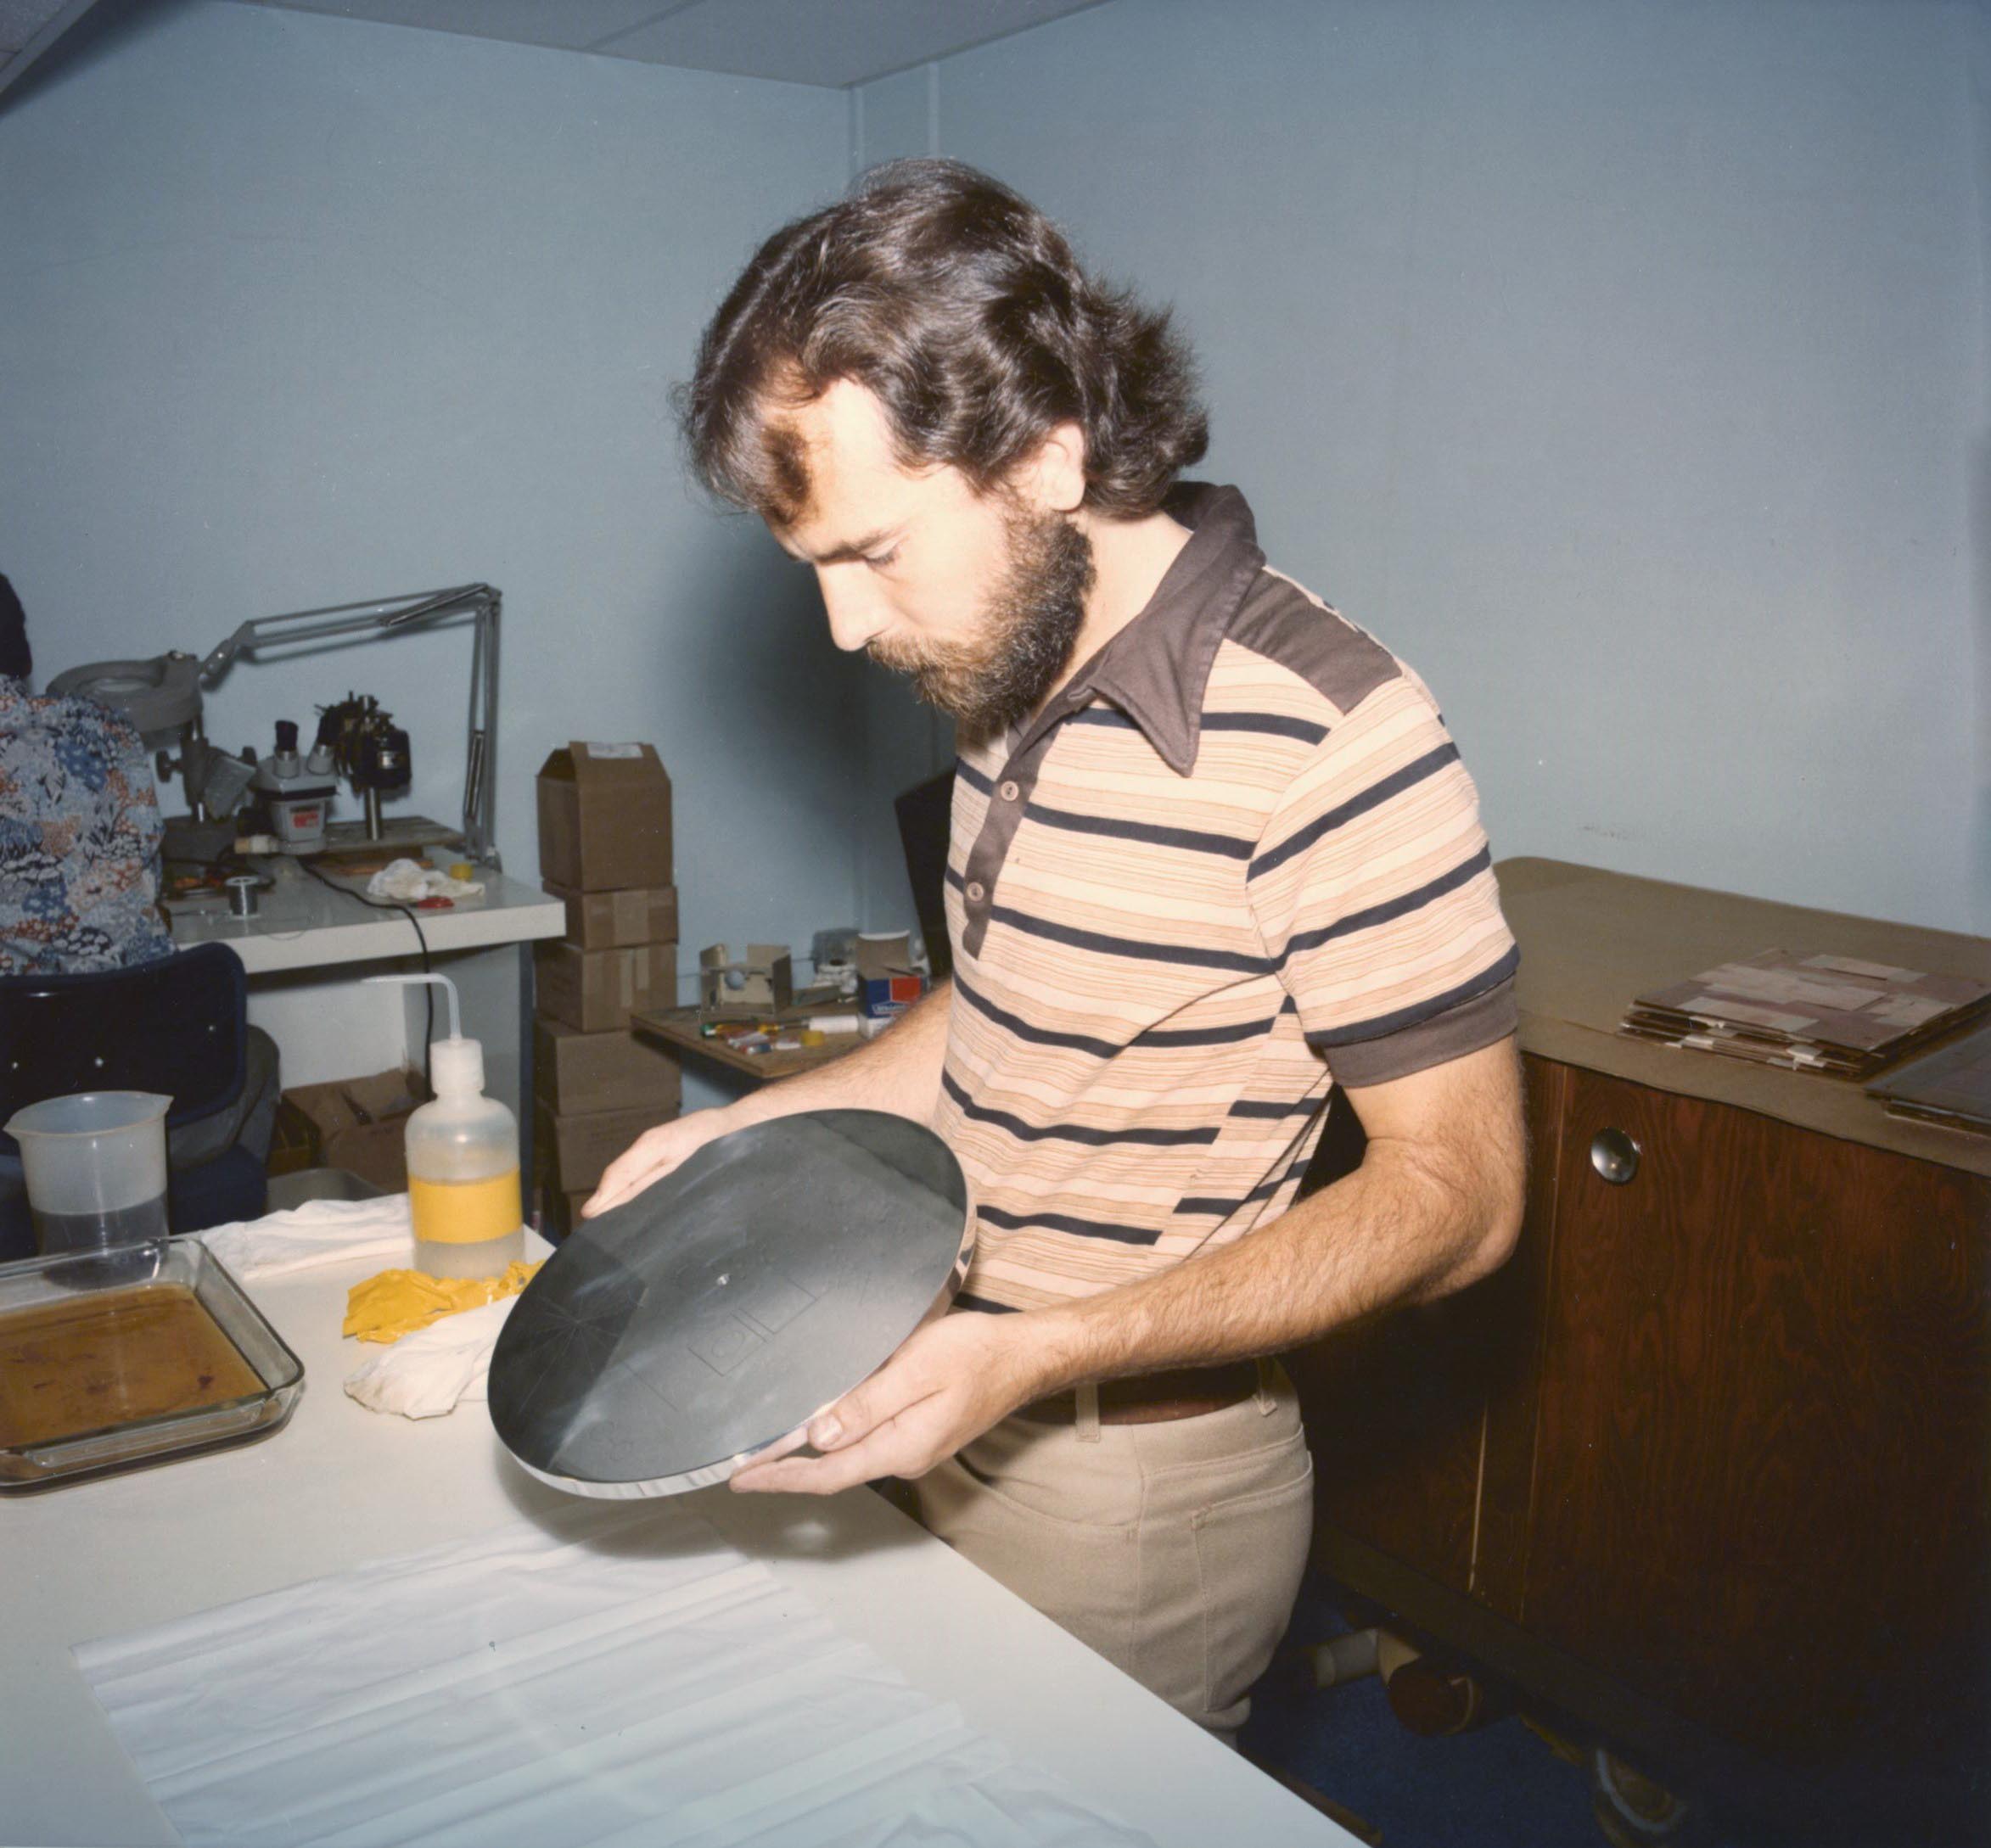 A man examines a polished album-sized disc.